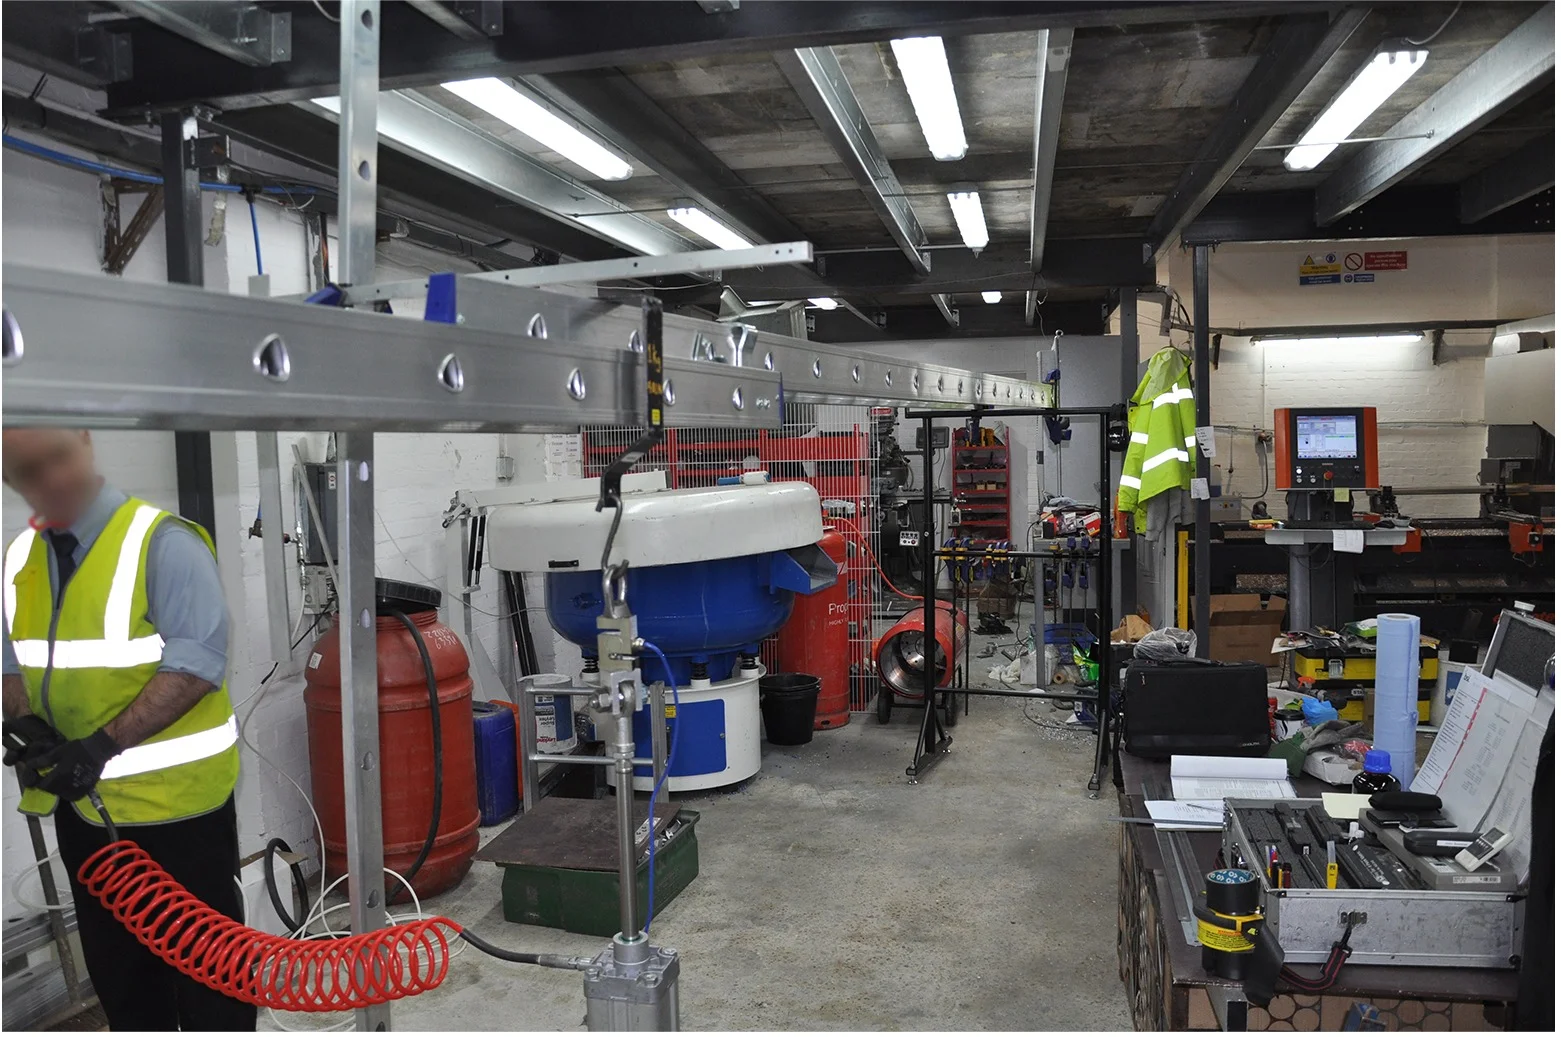 double heavy duty extension ladders being tested for industry